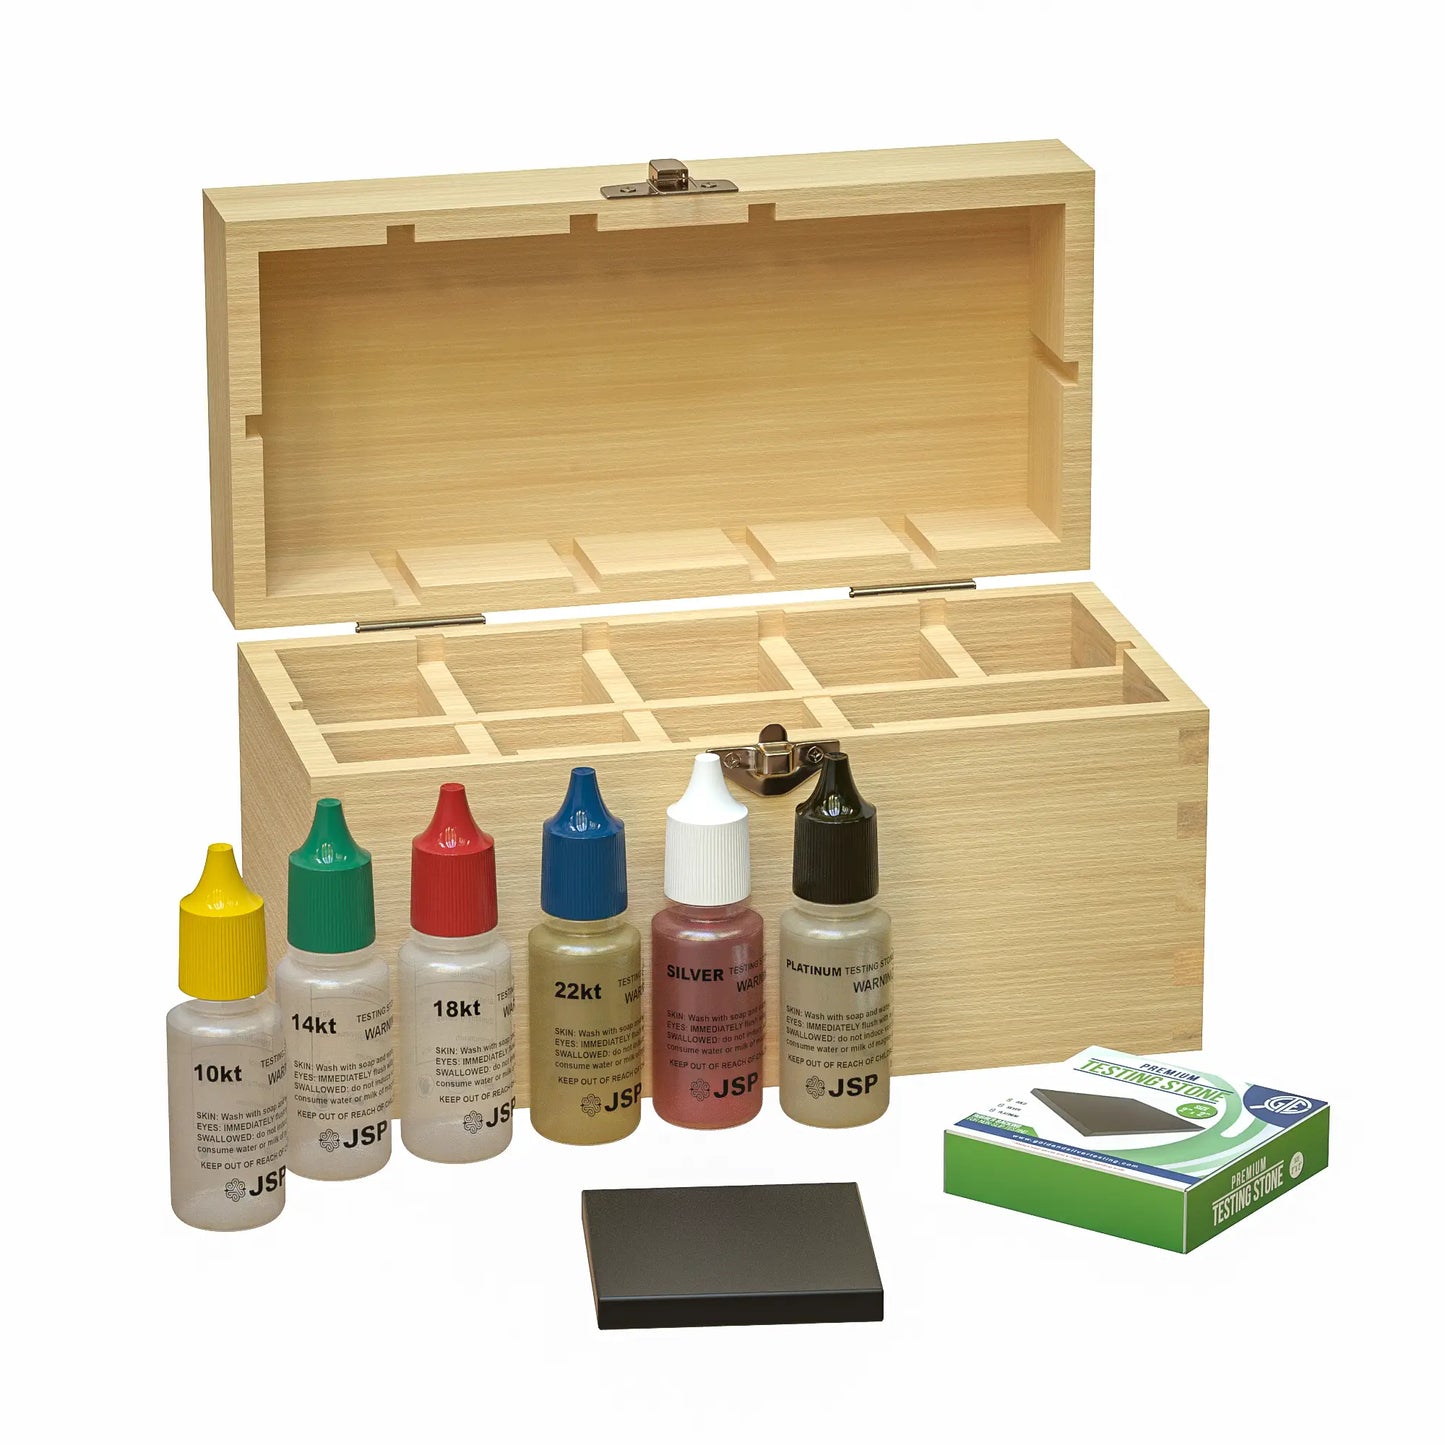 GOLD AND SILVER JEWELRY TEST KIT WITH STORAGE BOX FOR 10K 14K 18K 22K 24K STERLING PRECIOUS METALS SCRAP COINS BARS